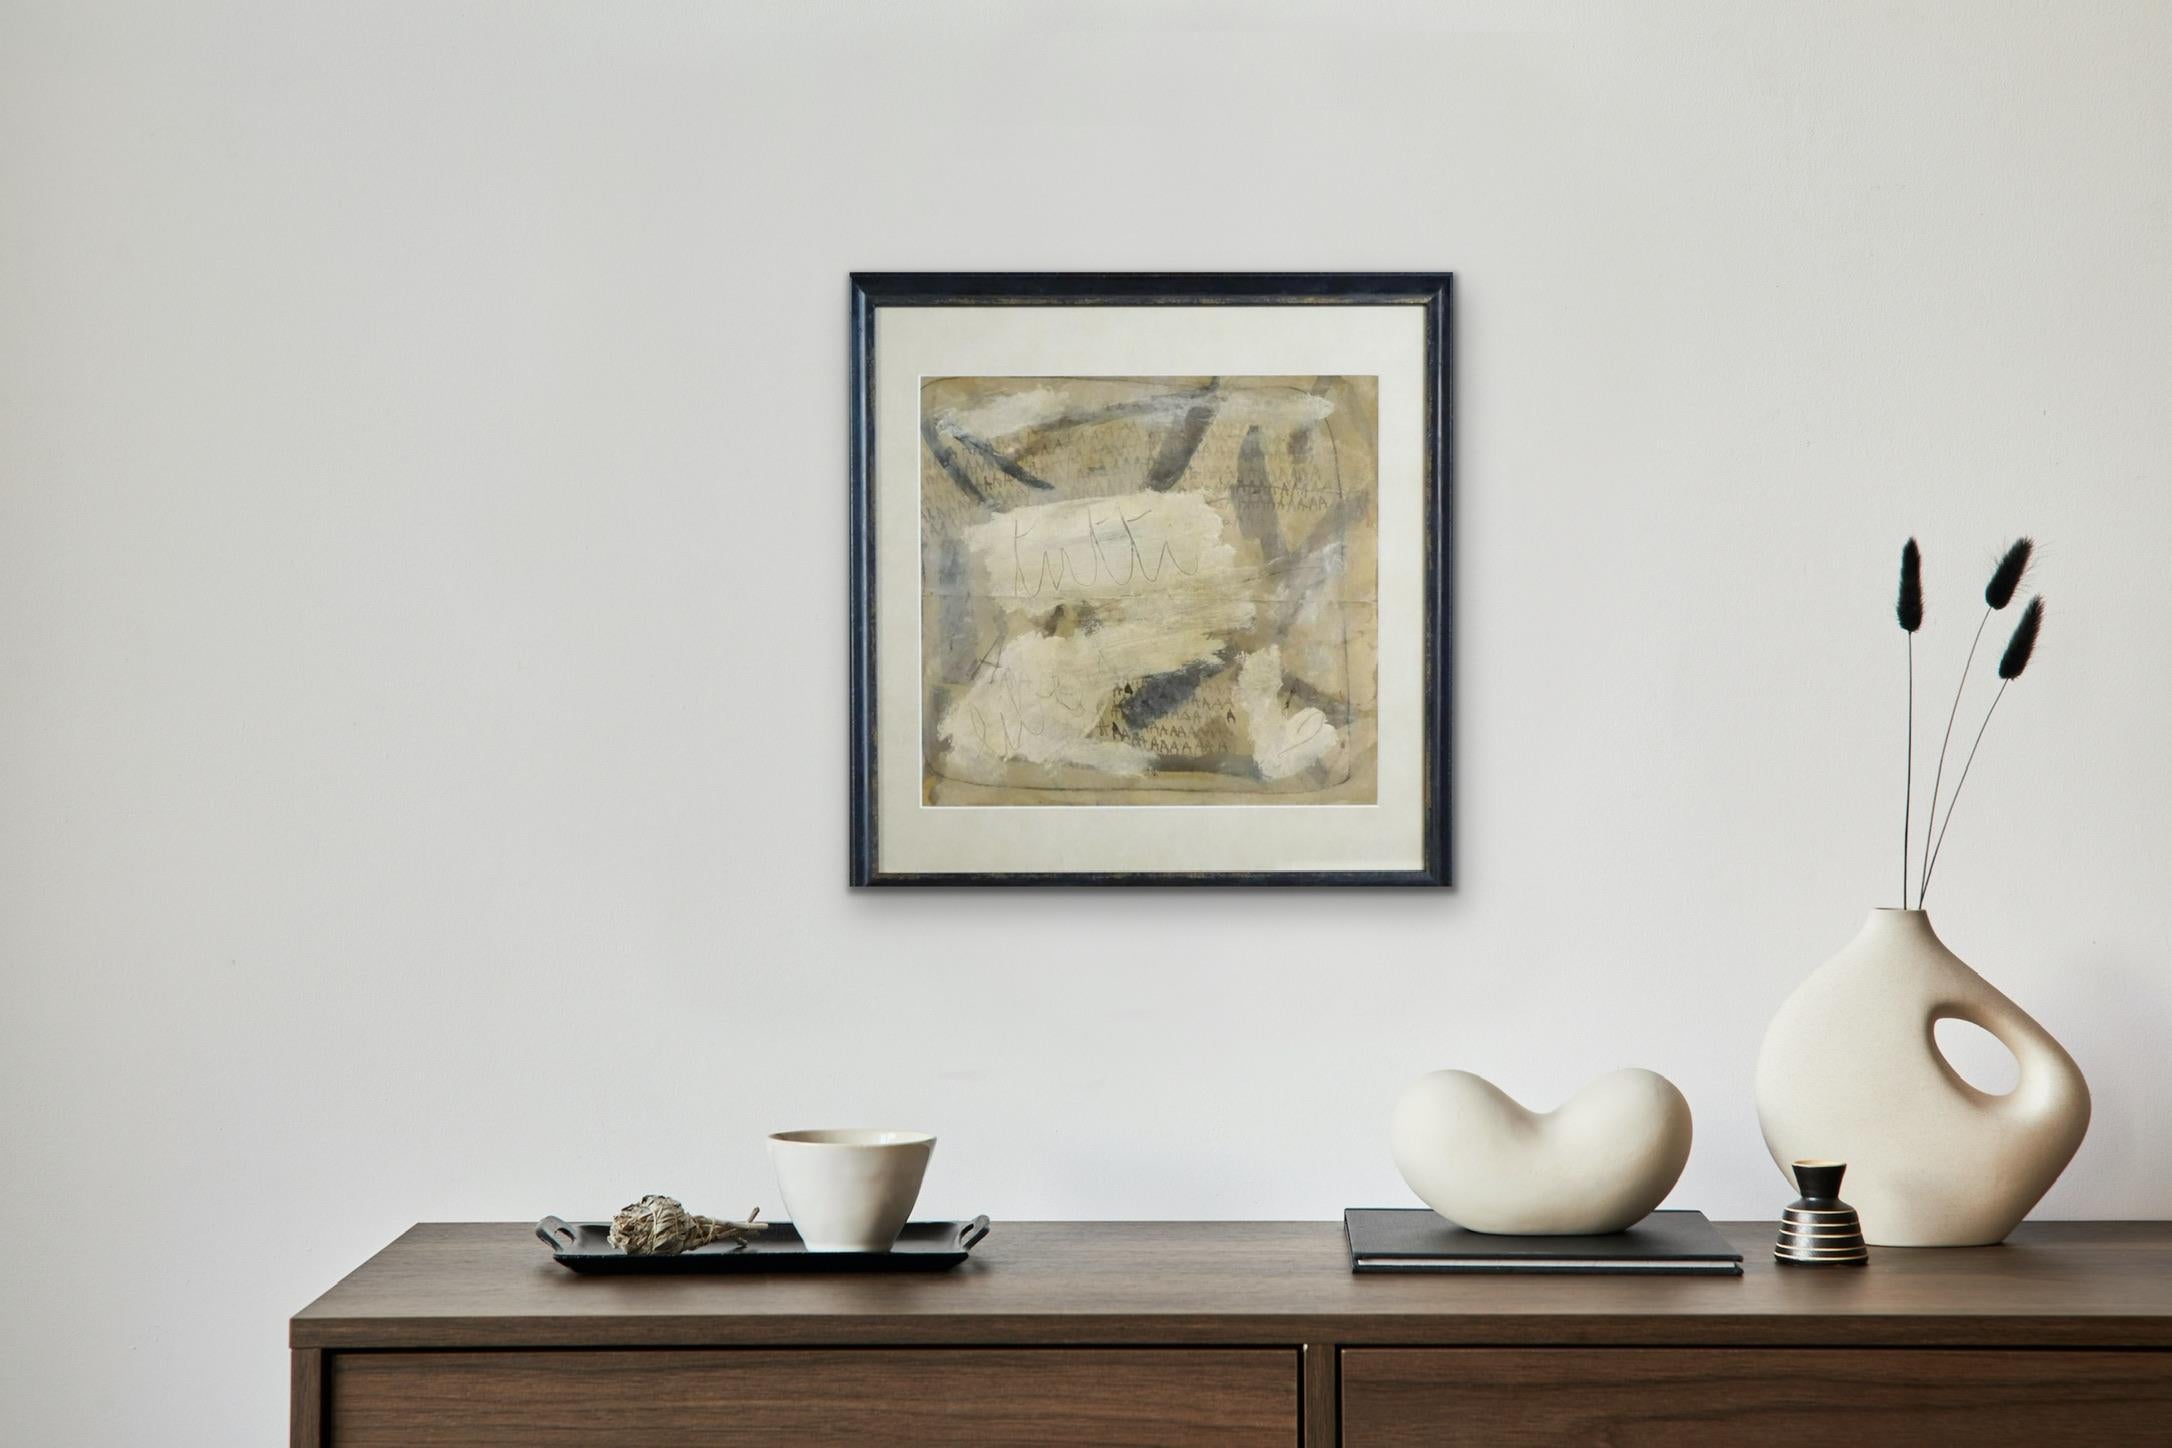 Abstract, oil, watercolor, ink & pencil on paper by important Italian artist, Gastone Novelli.
Signed & dated lower right 